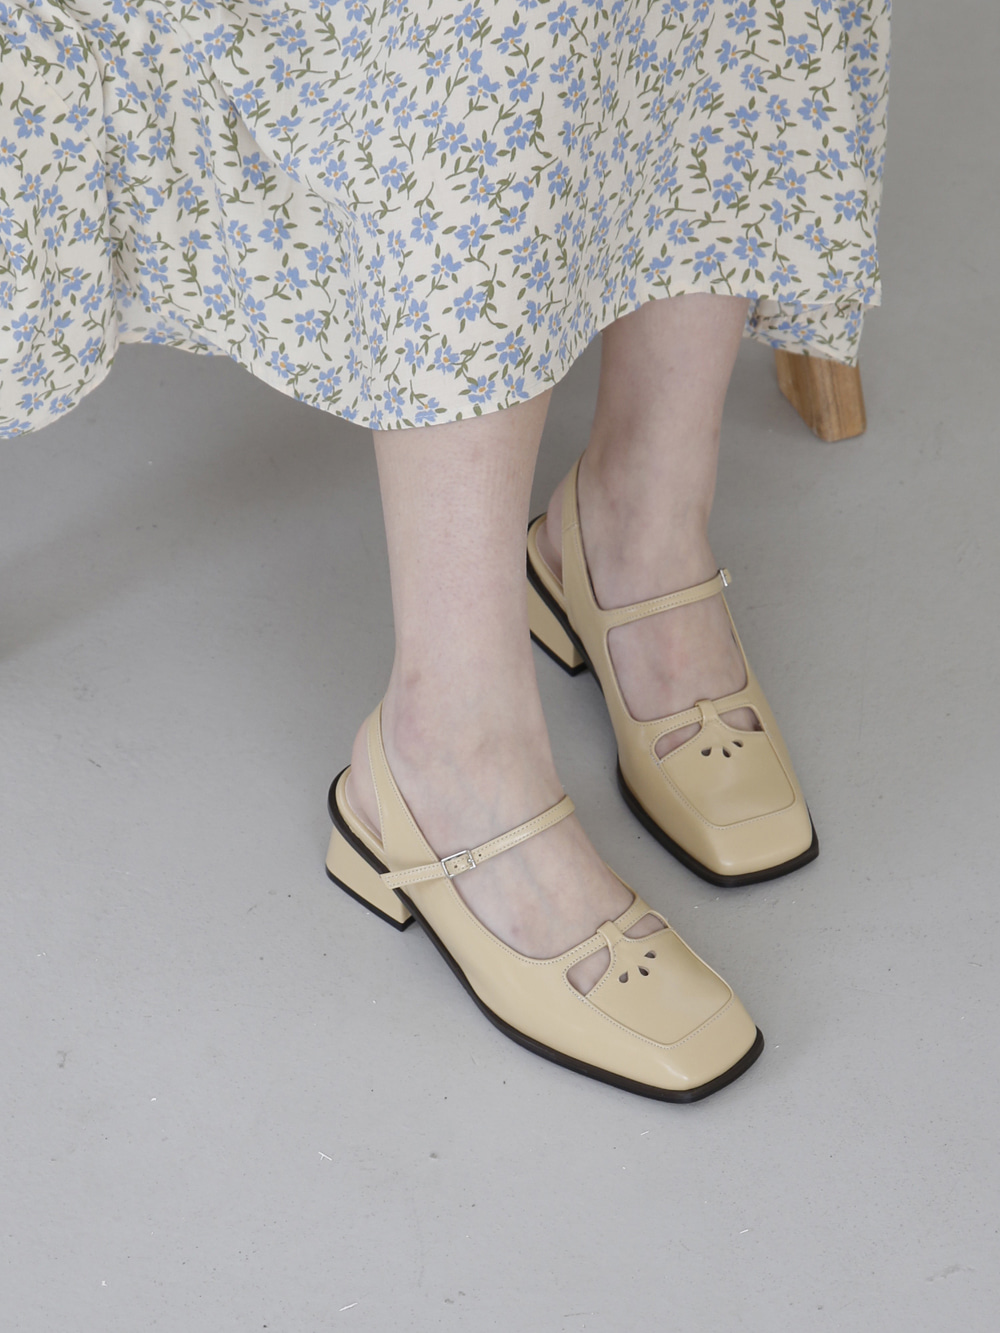 Square mary janes   Mellow yellow